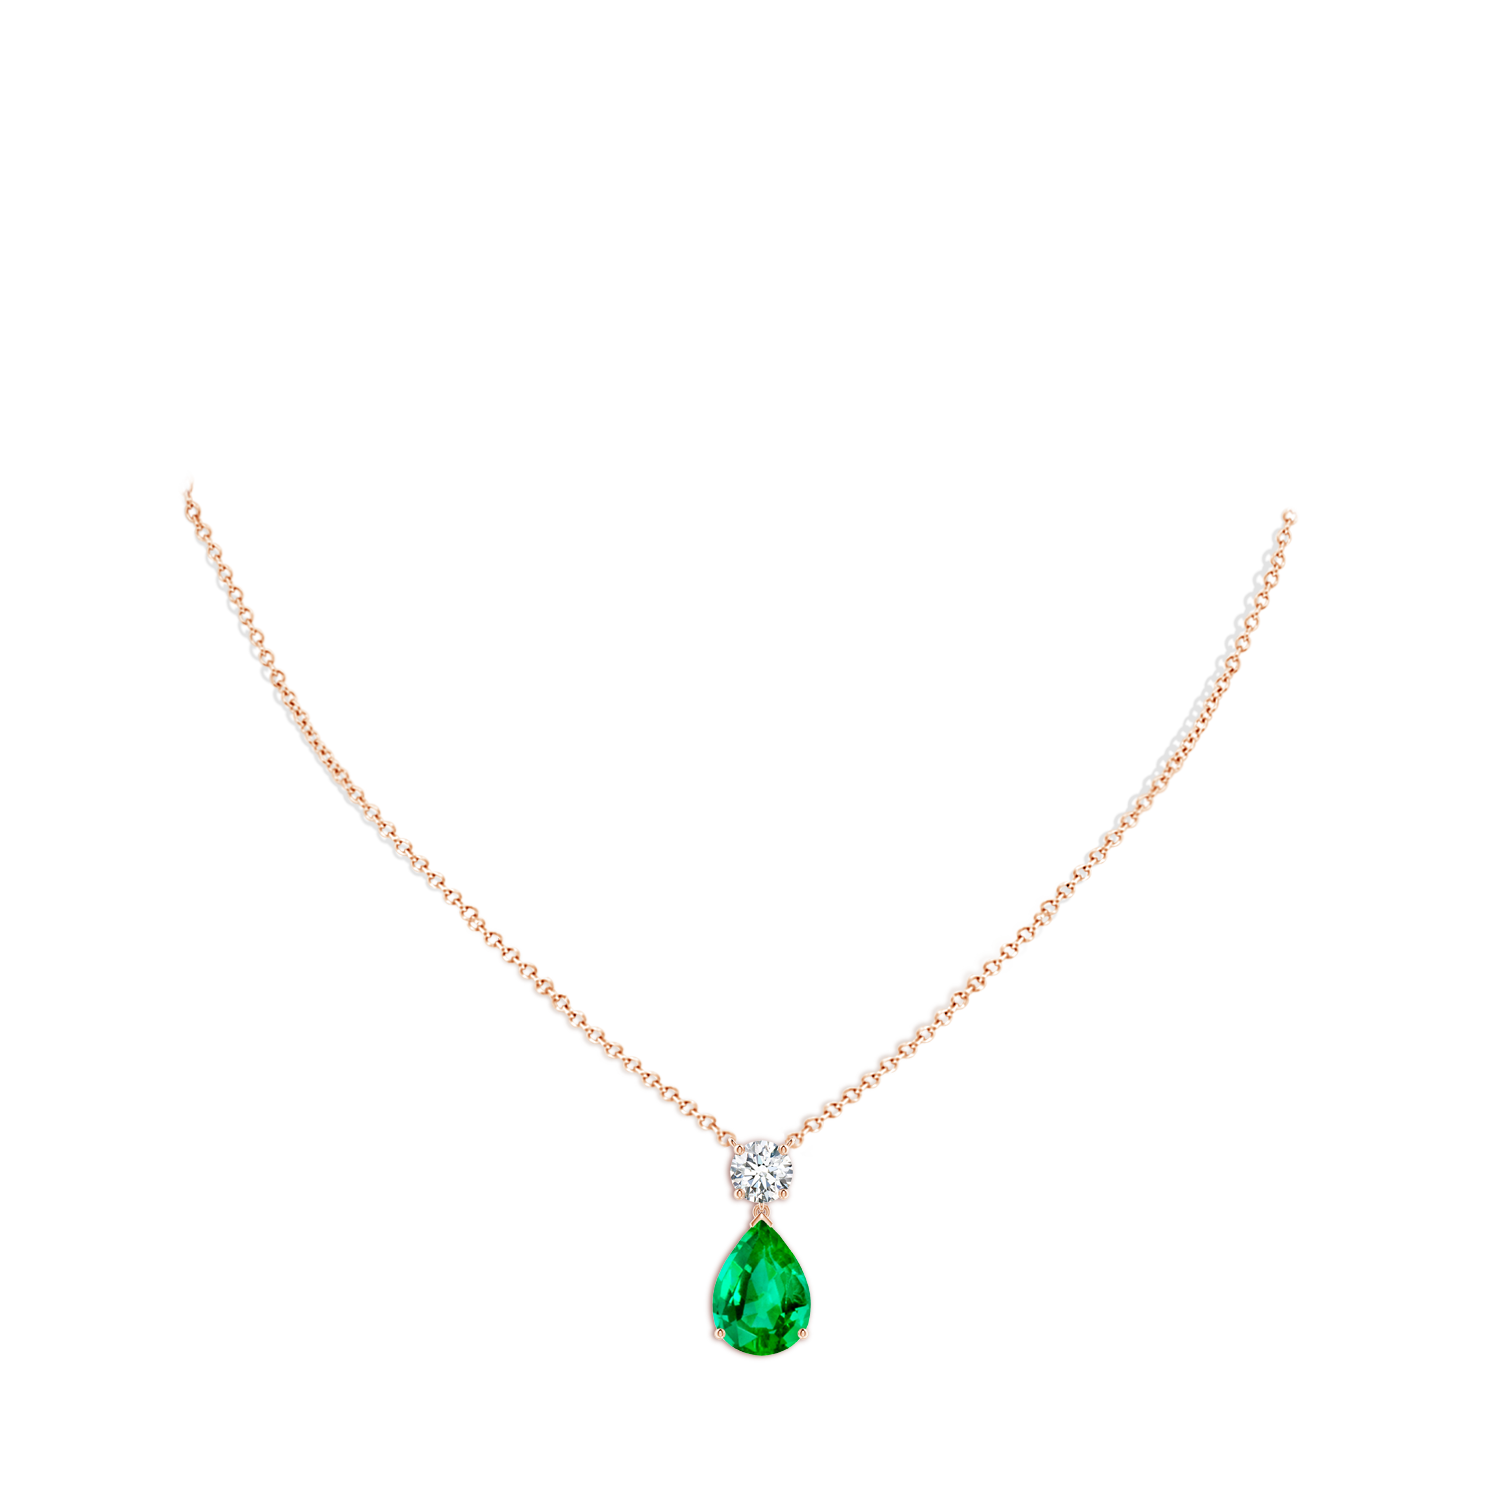 AAA - Emerald / 7.6 CT / 14 KT Rose Gold